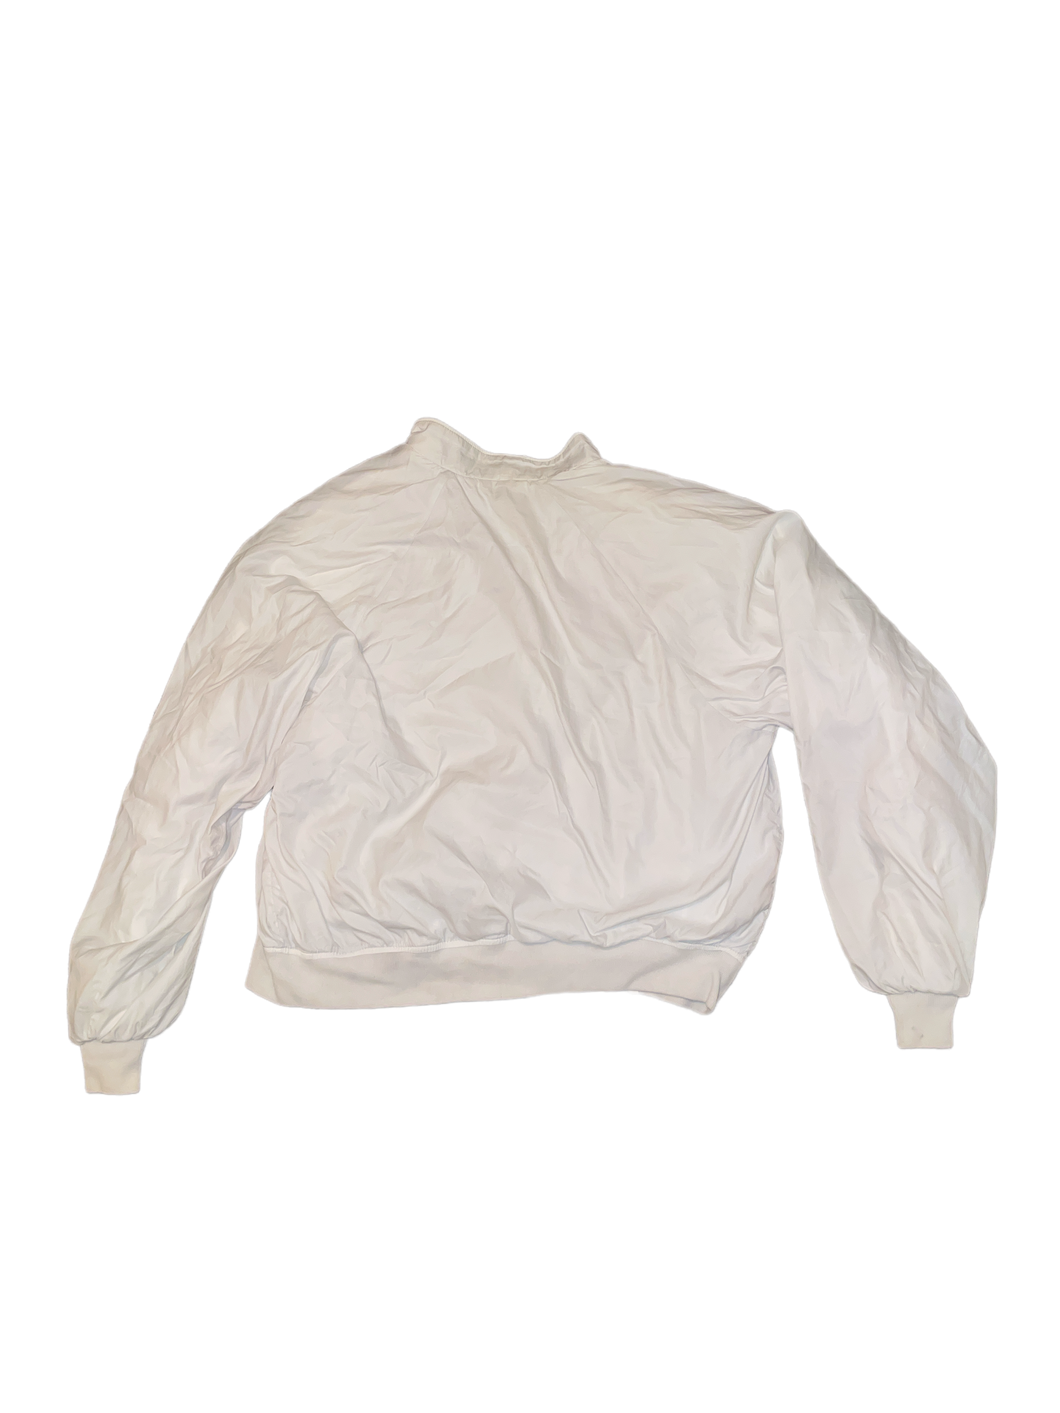 Duckster Pro Group White Zip Up Jacket